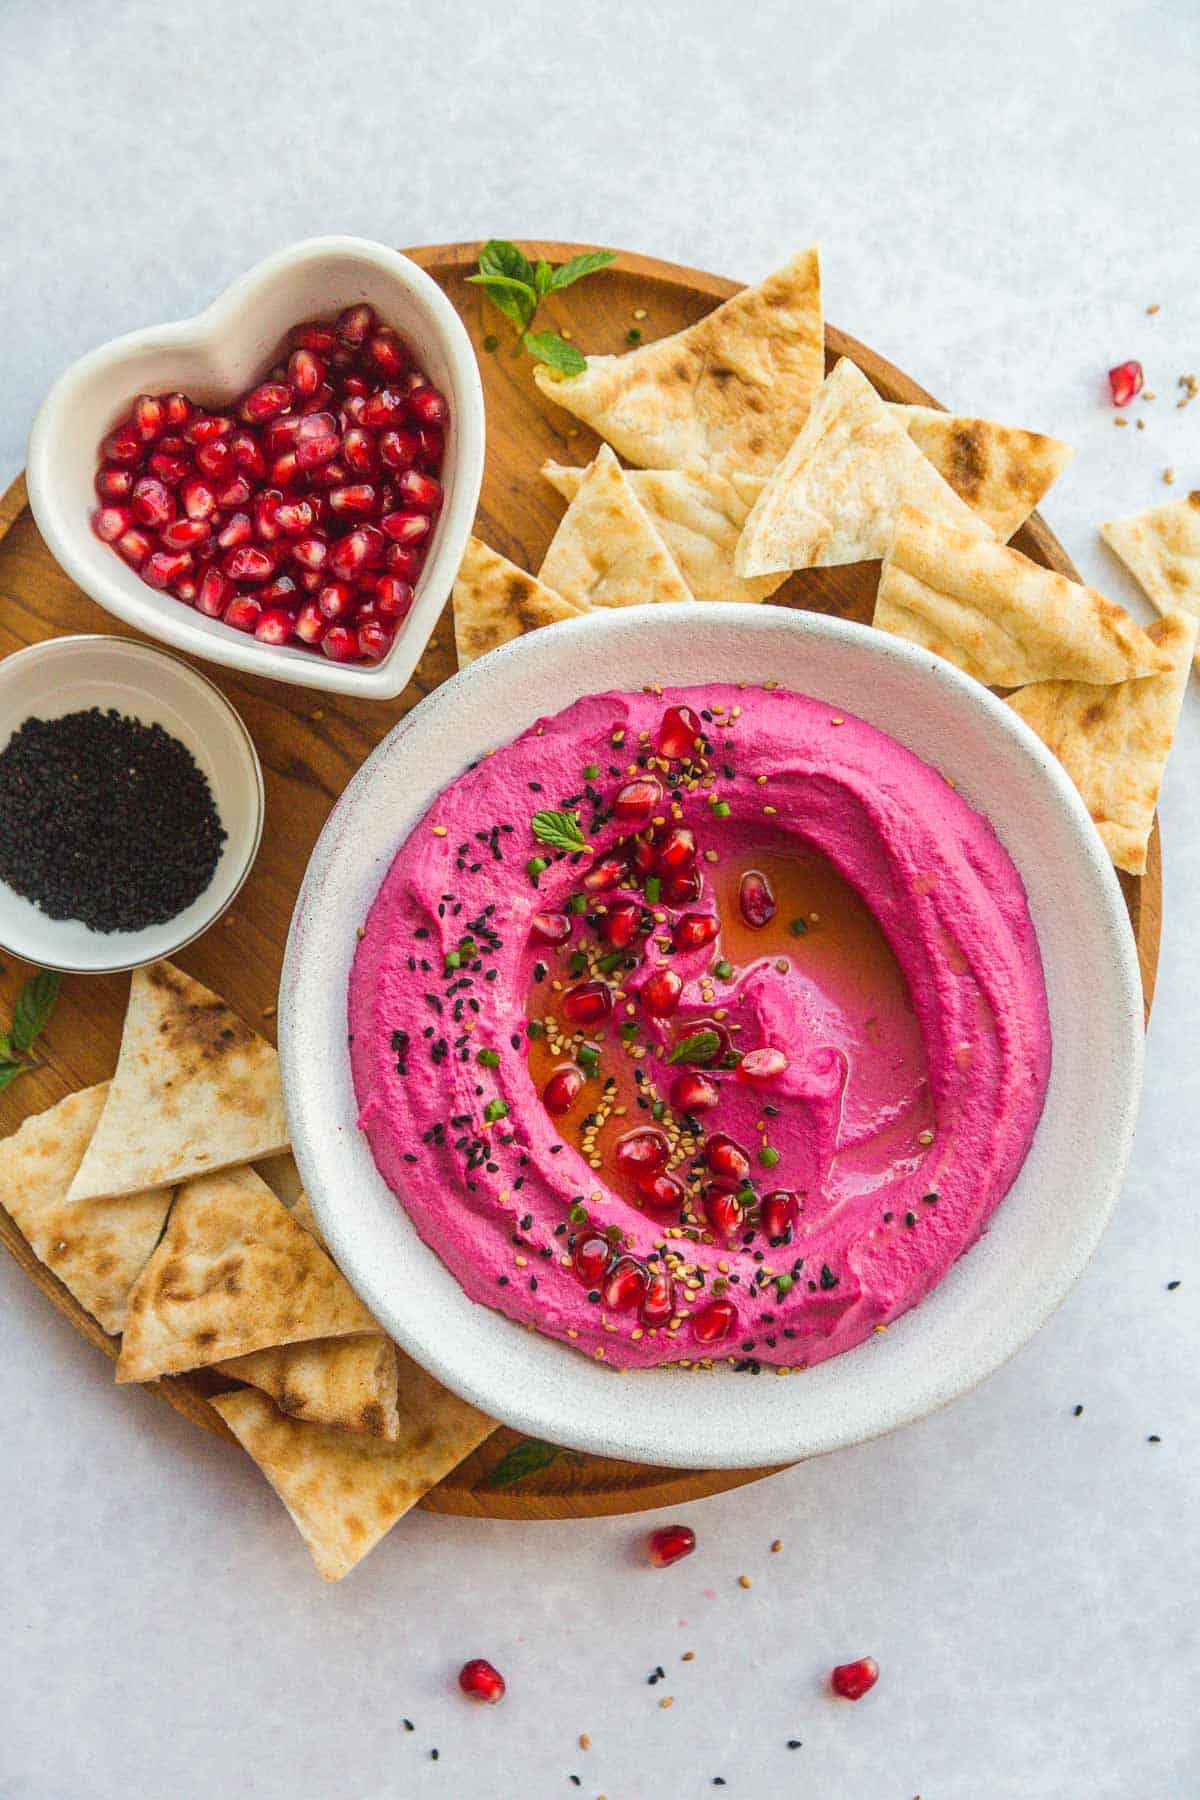 Creamy Beet Hummus in a white bowl, with small bowls with pomegranate seeds and nigella seeds